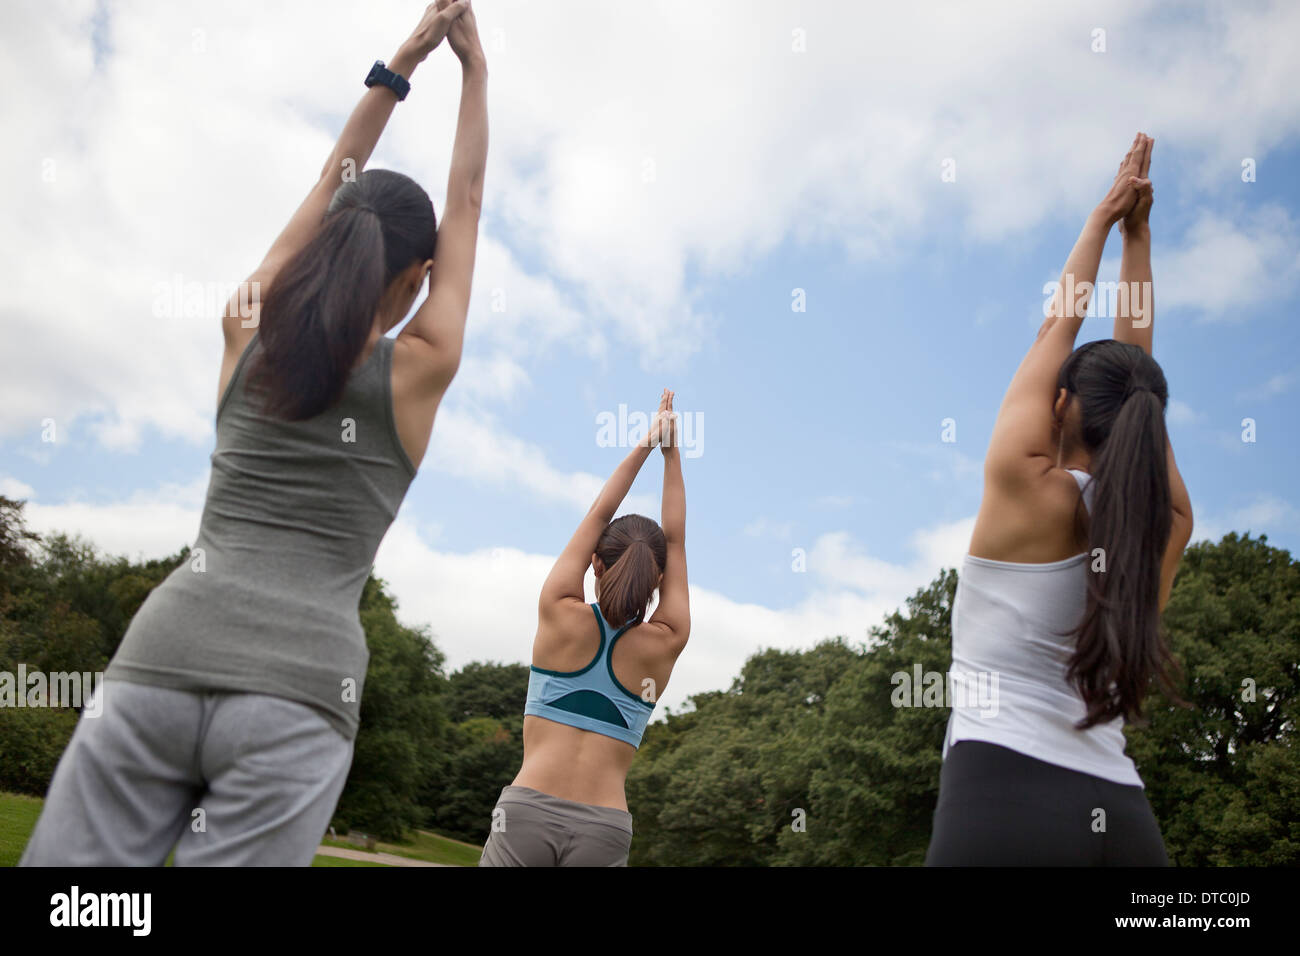 Three young women practicing yoga in park Stock Photo